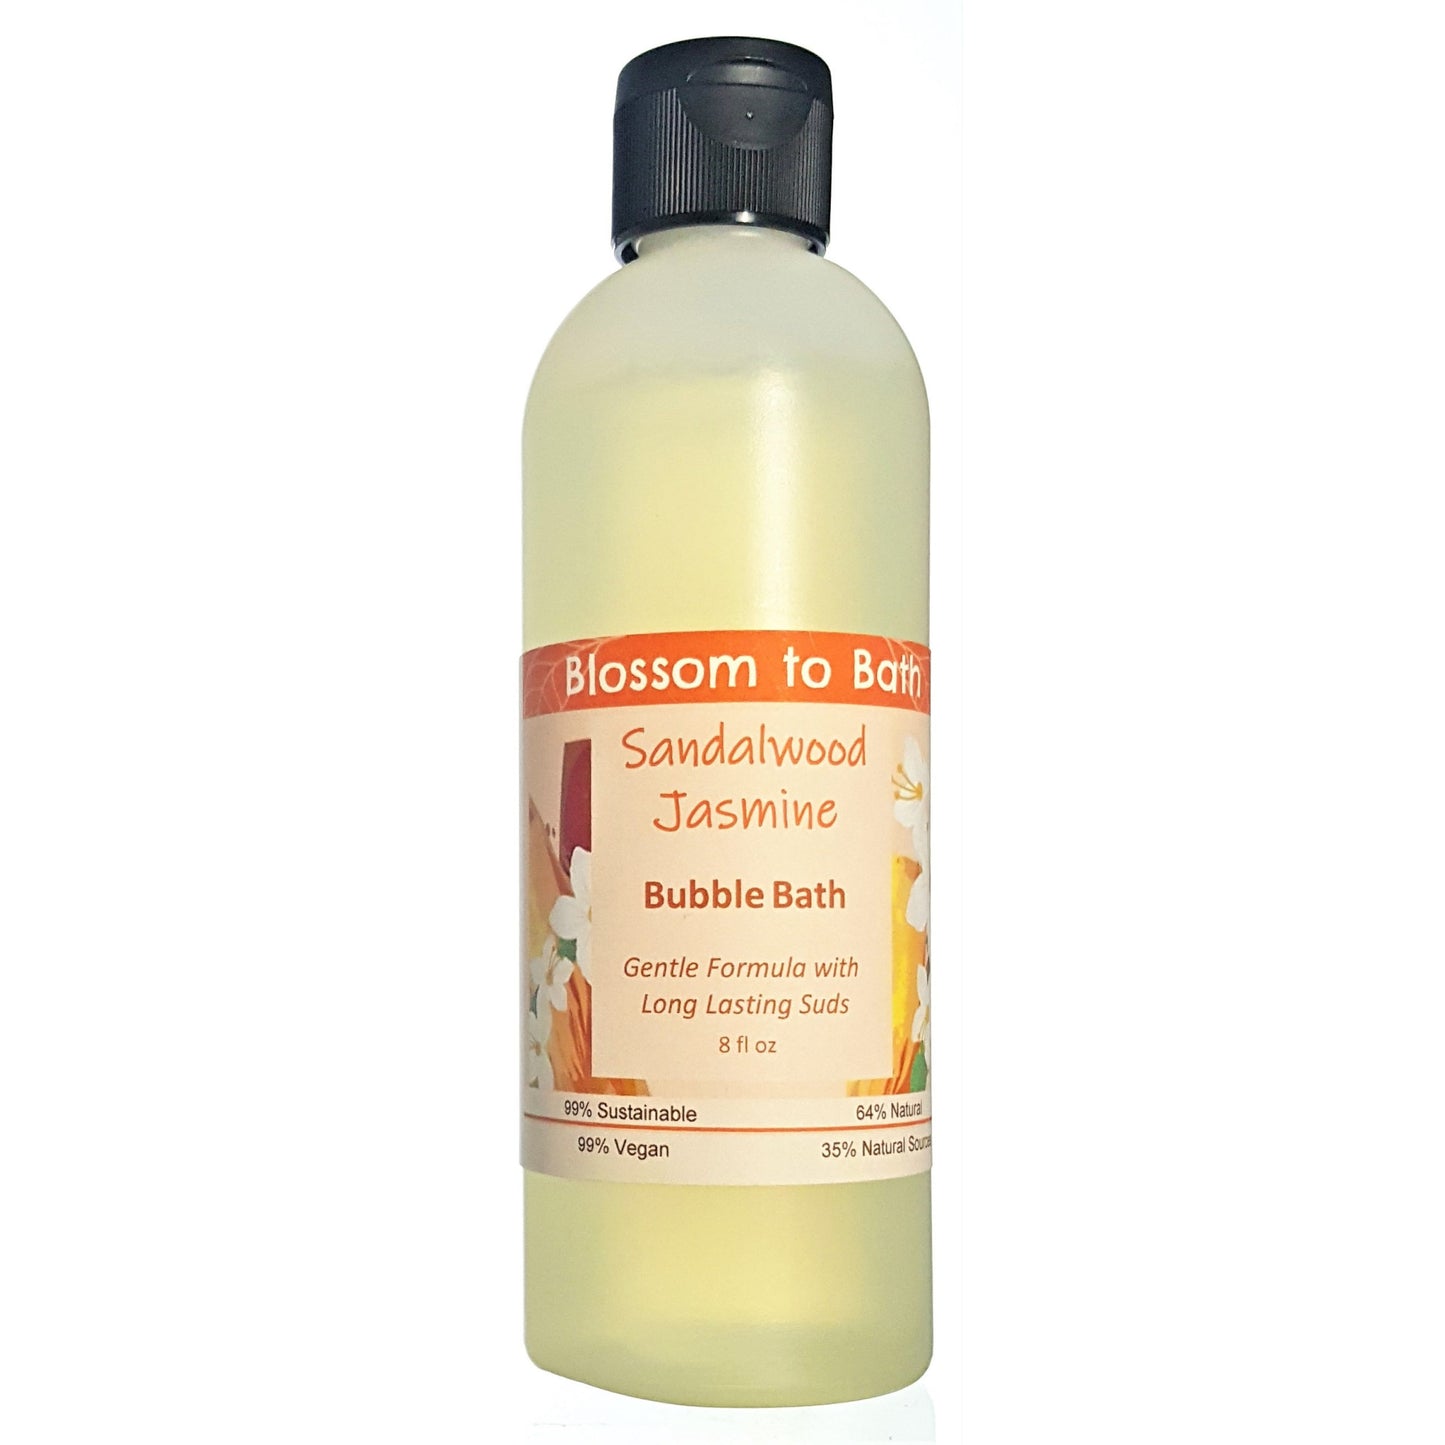 Buy Blossom to Bath Sandalwood Jasmine Bubble Bath from Flowersong Soap Studio.  Lively, long lasting luxury bubbles in a gentle plant based formula for maximum relaxation time  Floral jasmine meets earthy sandalwood to create a soul stirring blend.